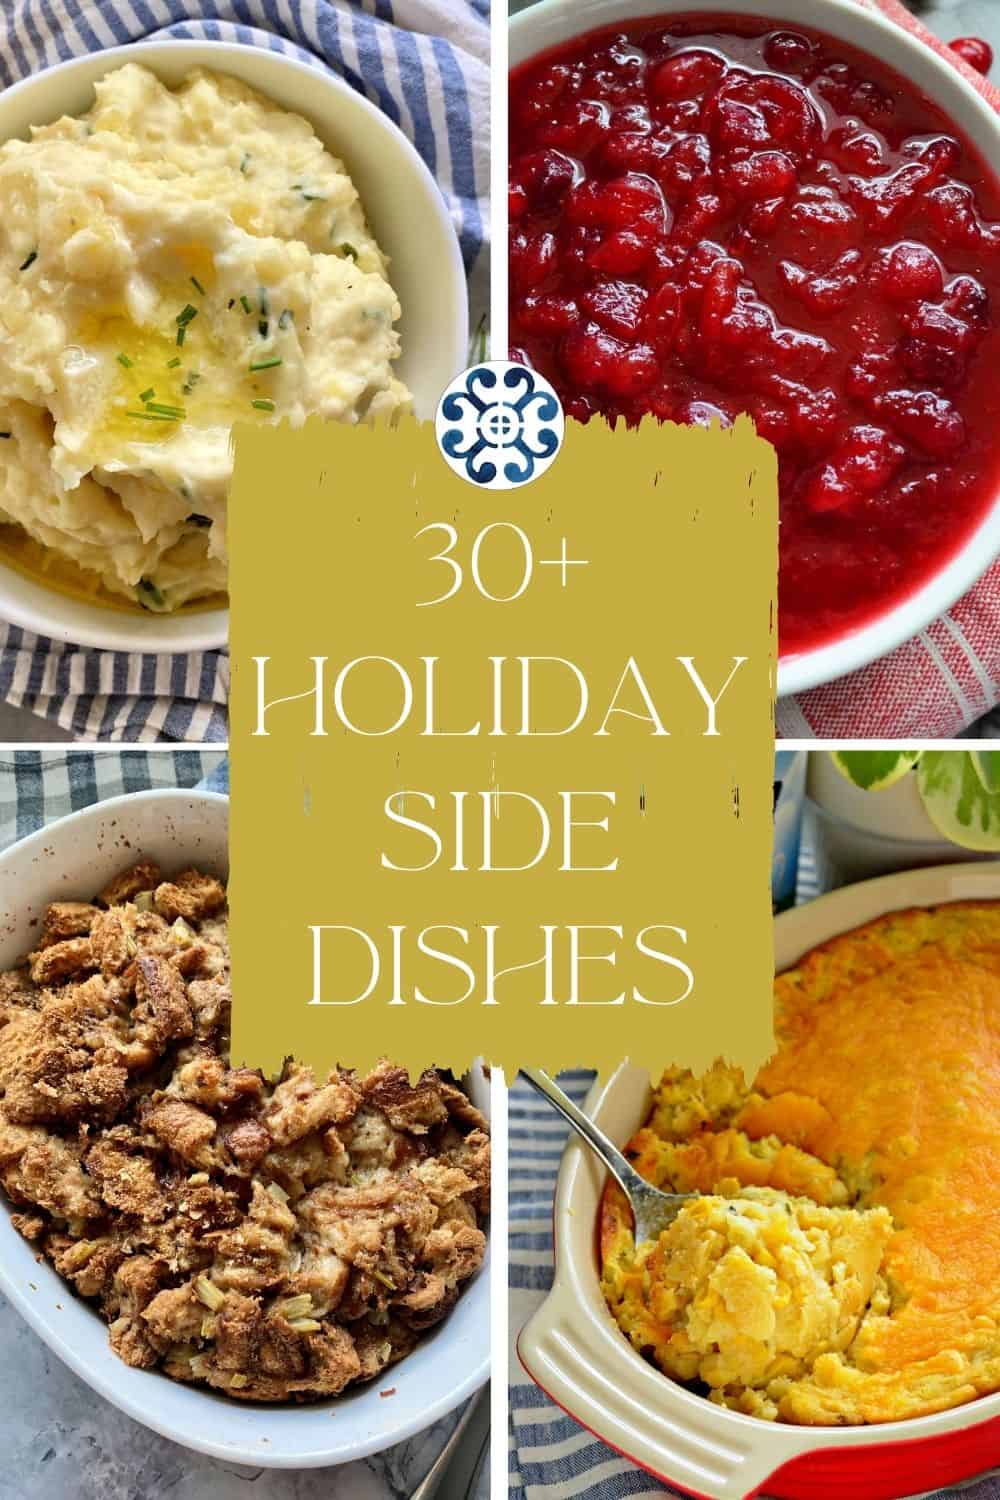 30+ Holiday Side Dishes